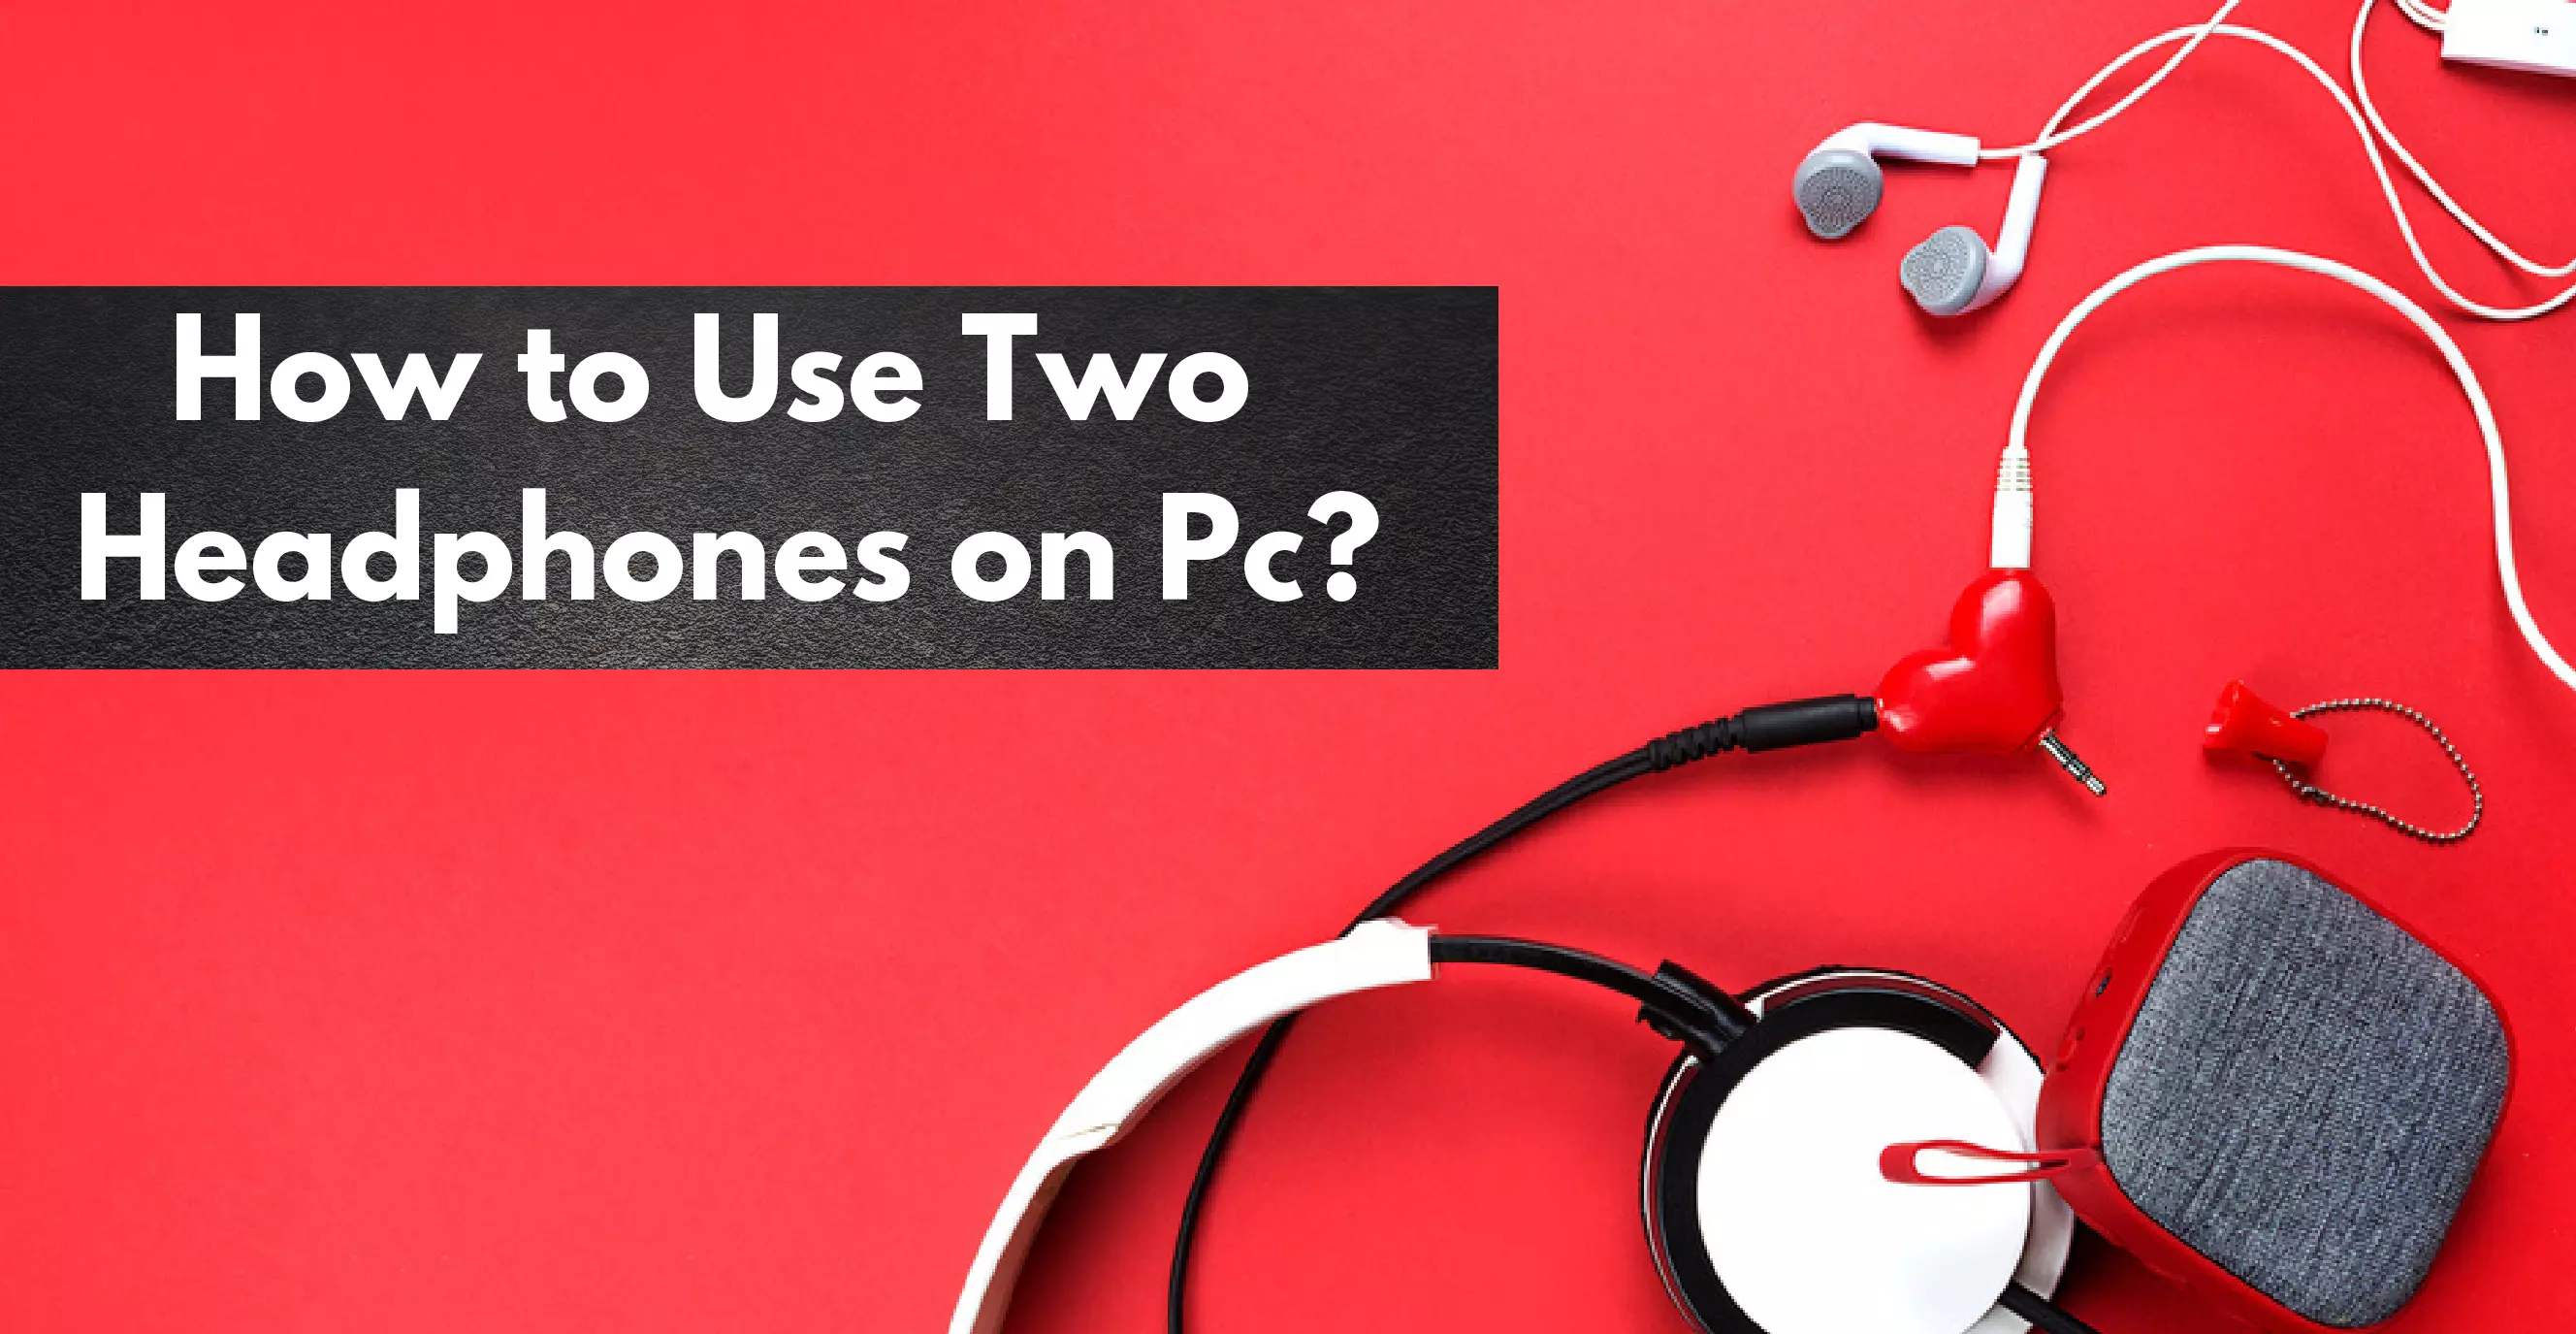 How to Use Two Headphones on Pc